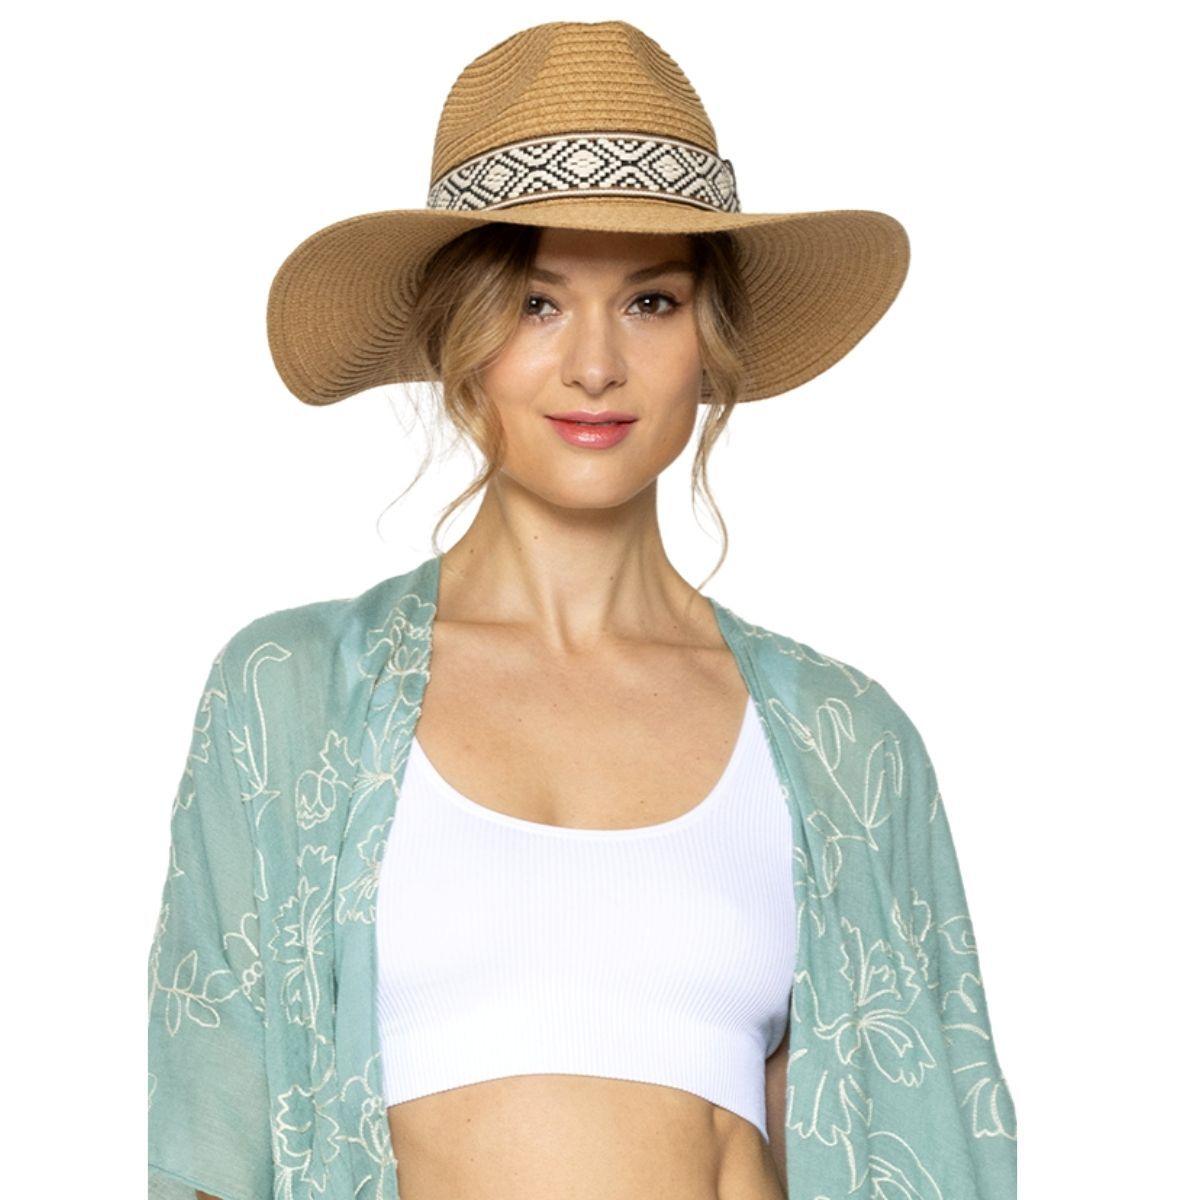 Camel Womens Panama Straw Hat with Woven Detail